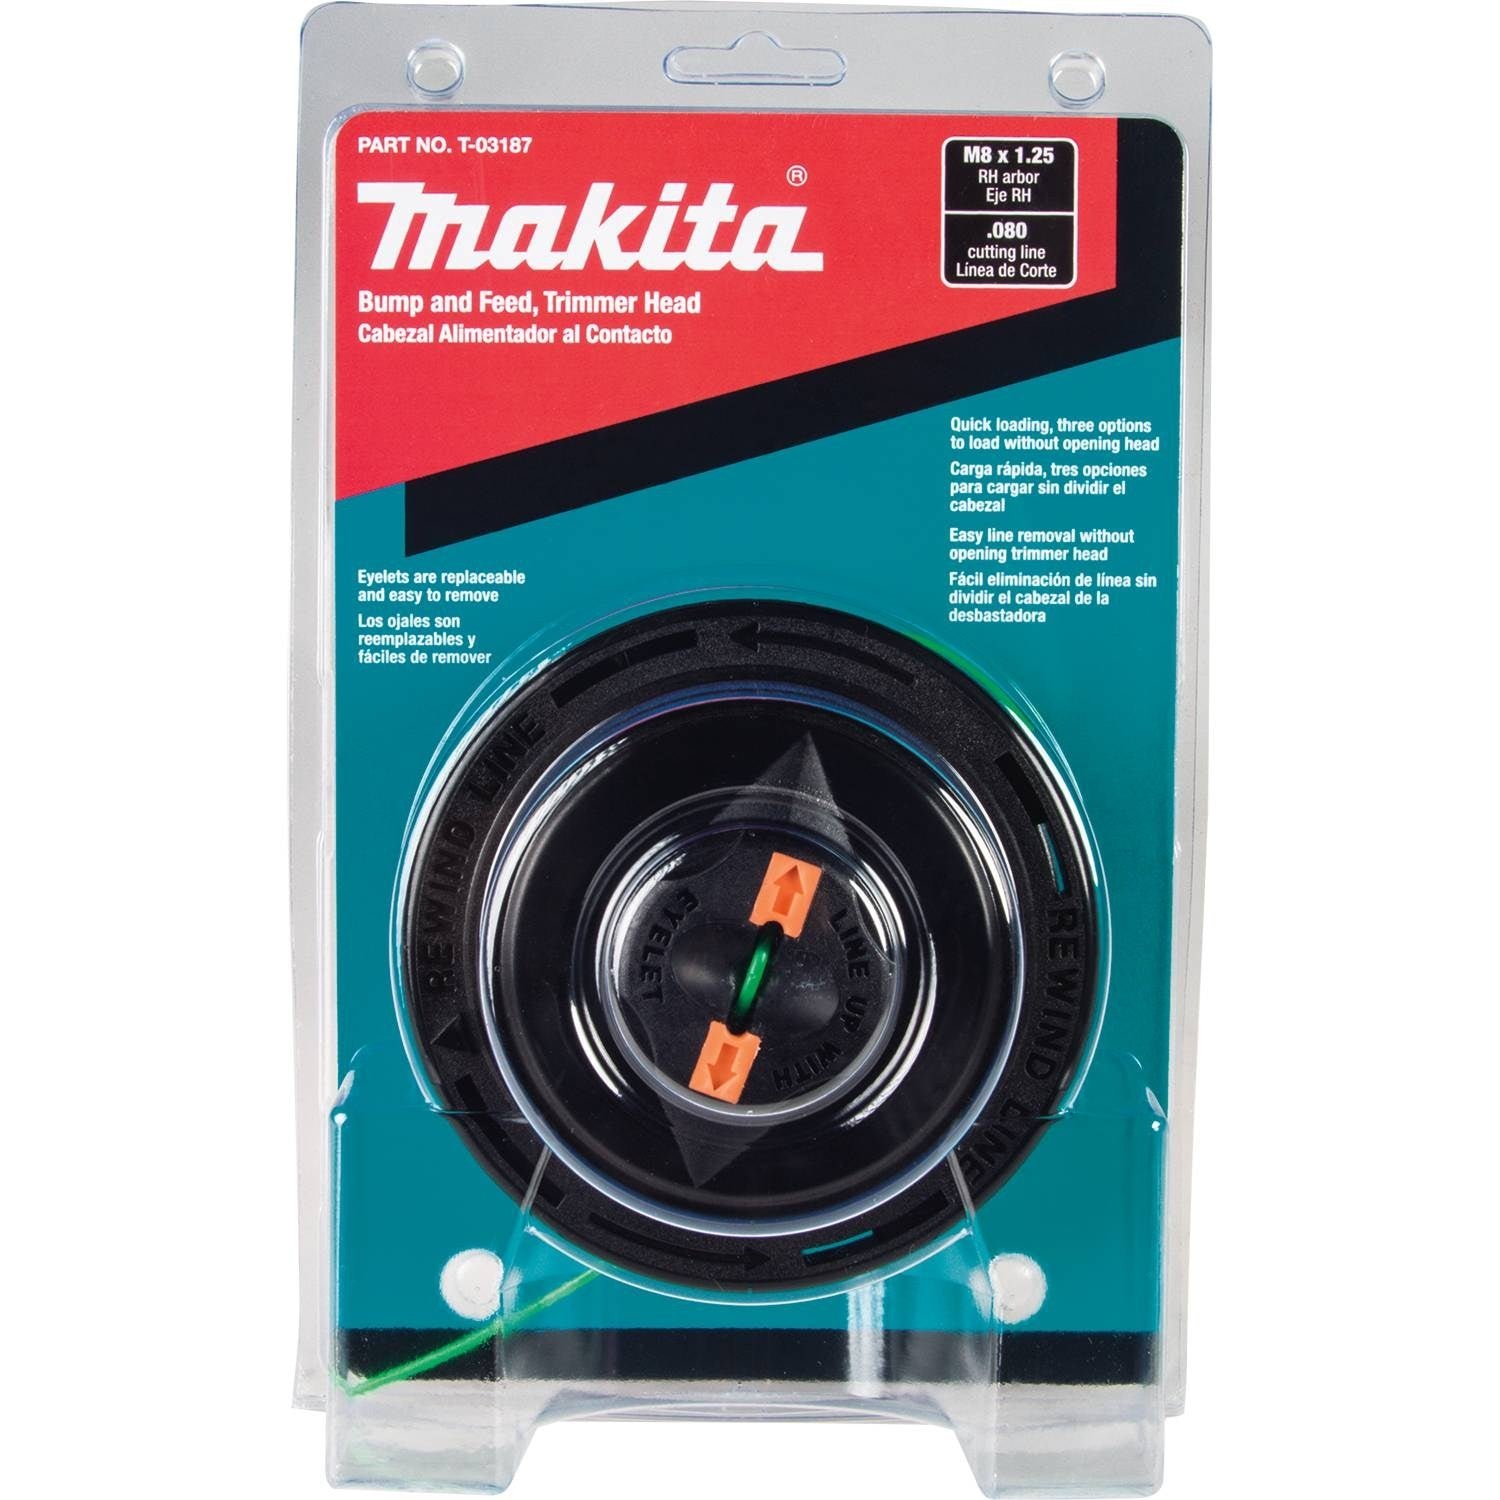 Makita T-03187 Trimmer Head, Bump and Feed, RH